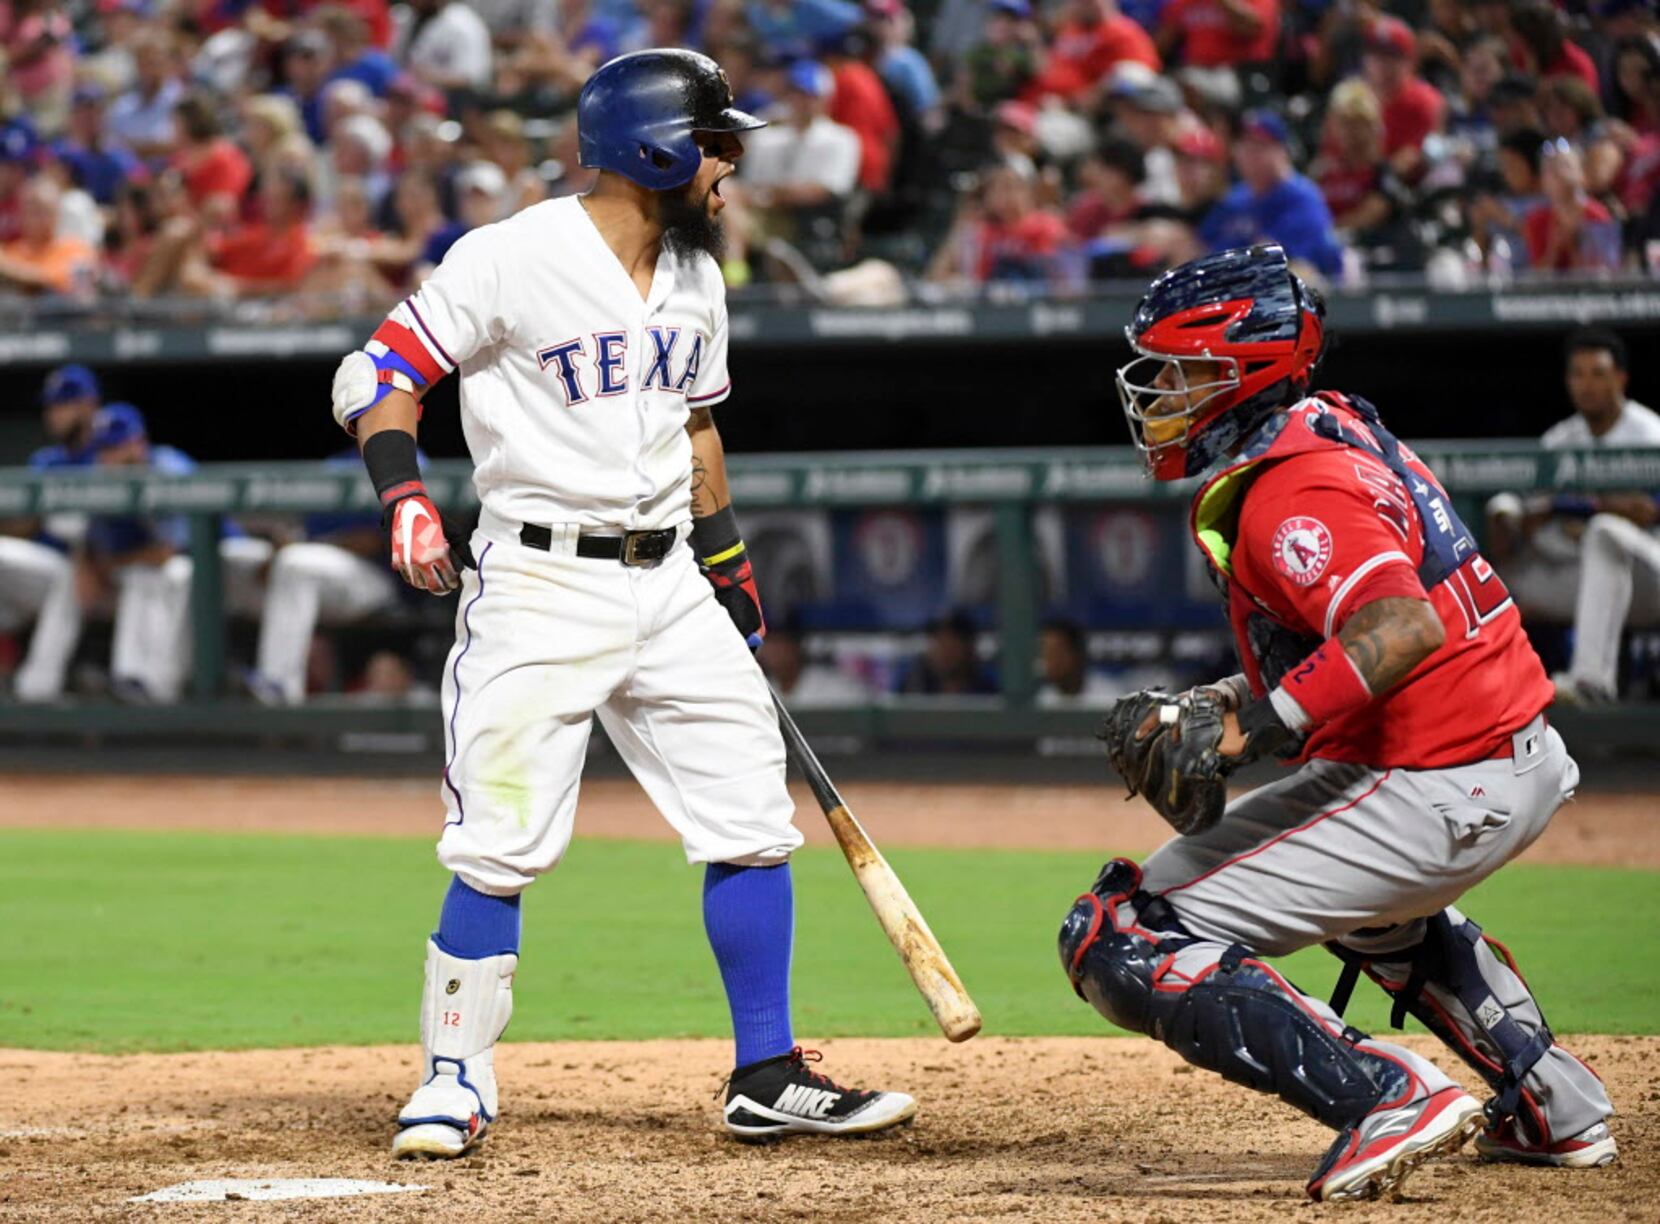 Rougned Odor could lose everyday role